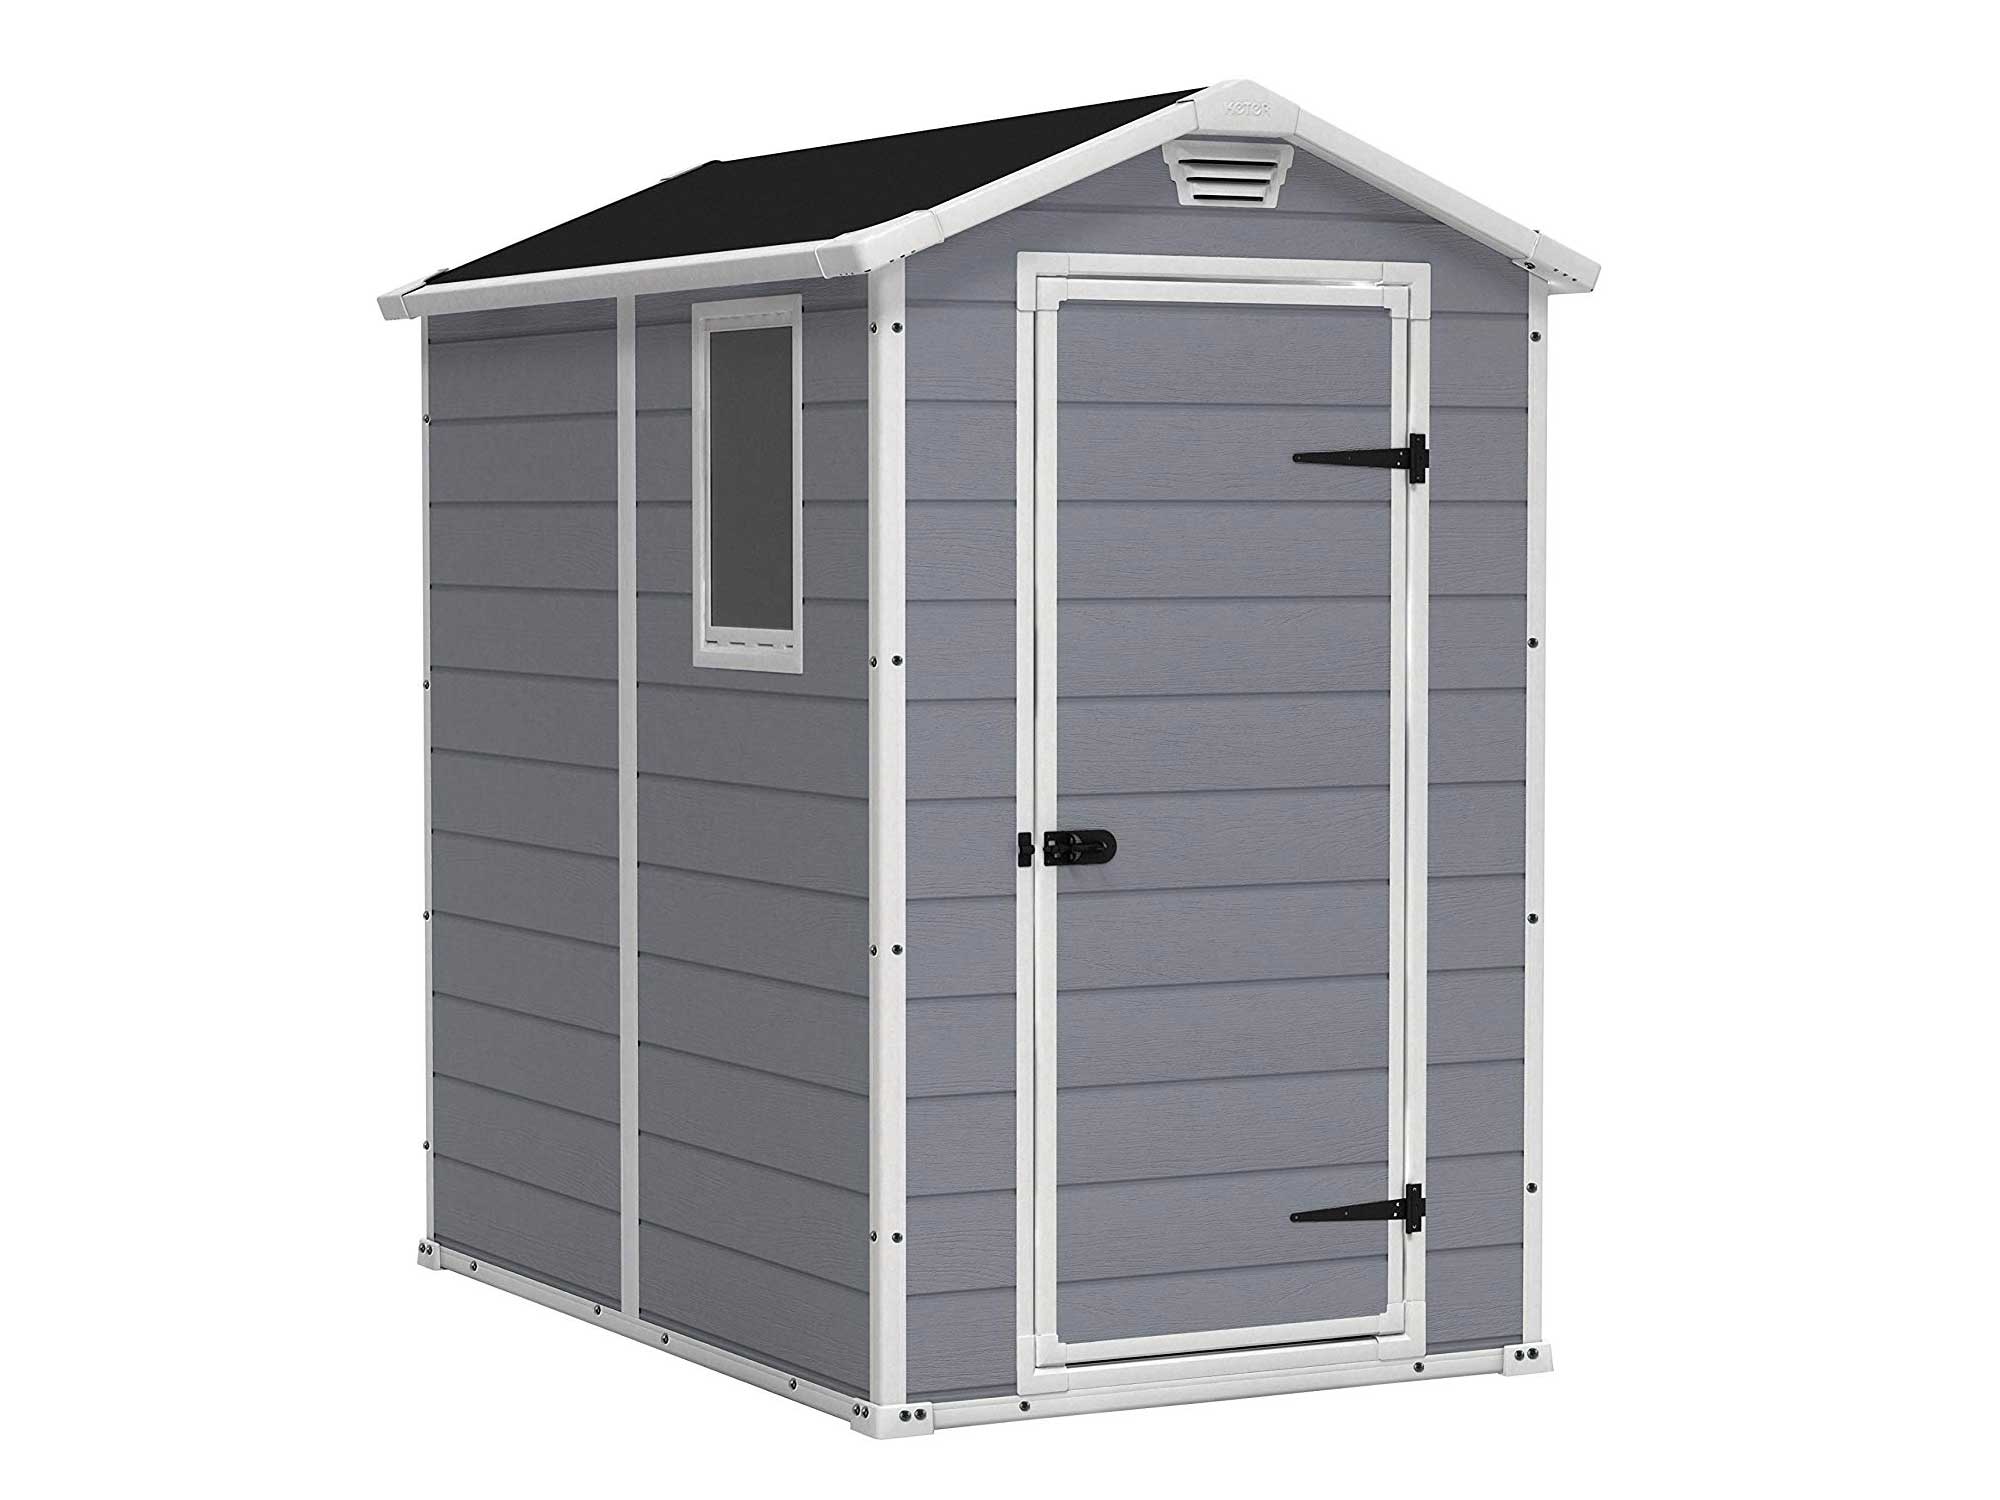 Keter Manor gray outdoor shed